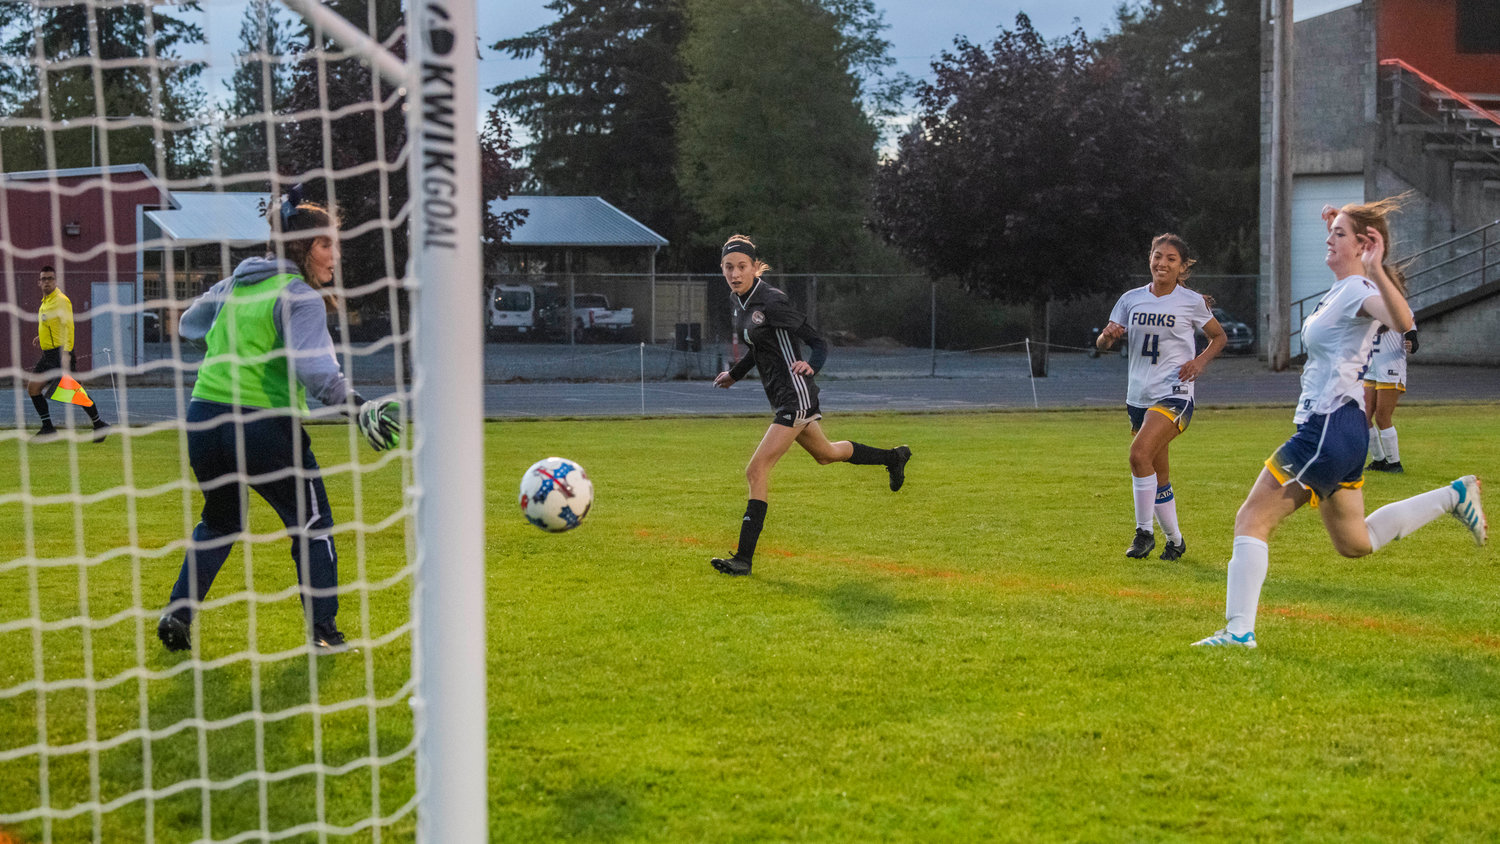 Napavine sophomore Grace Pancake (4) watches as her shot bounces into the goal for a score Monday night at Tiger Field.